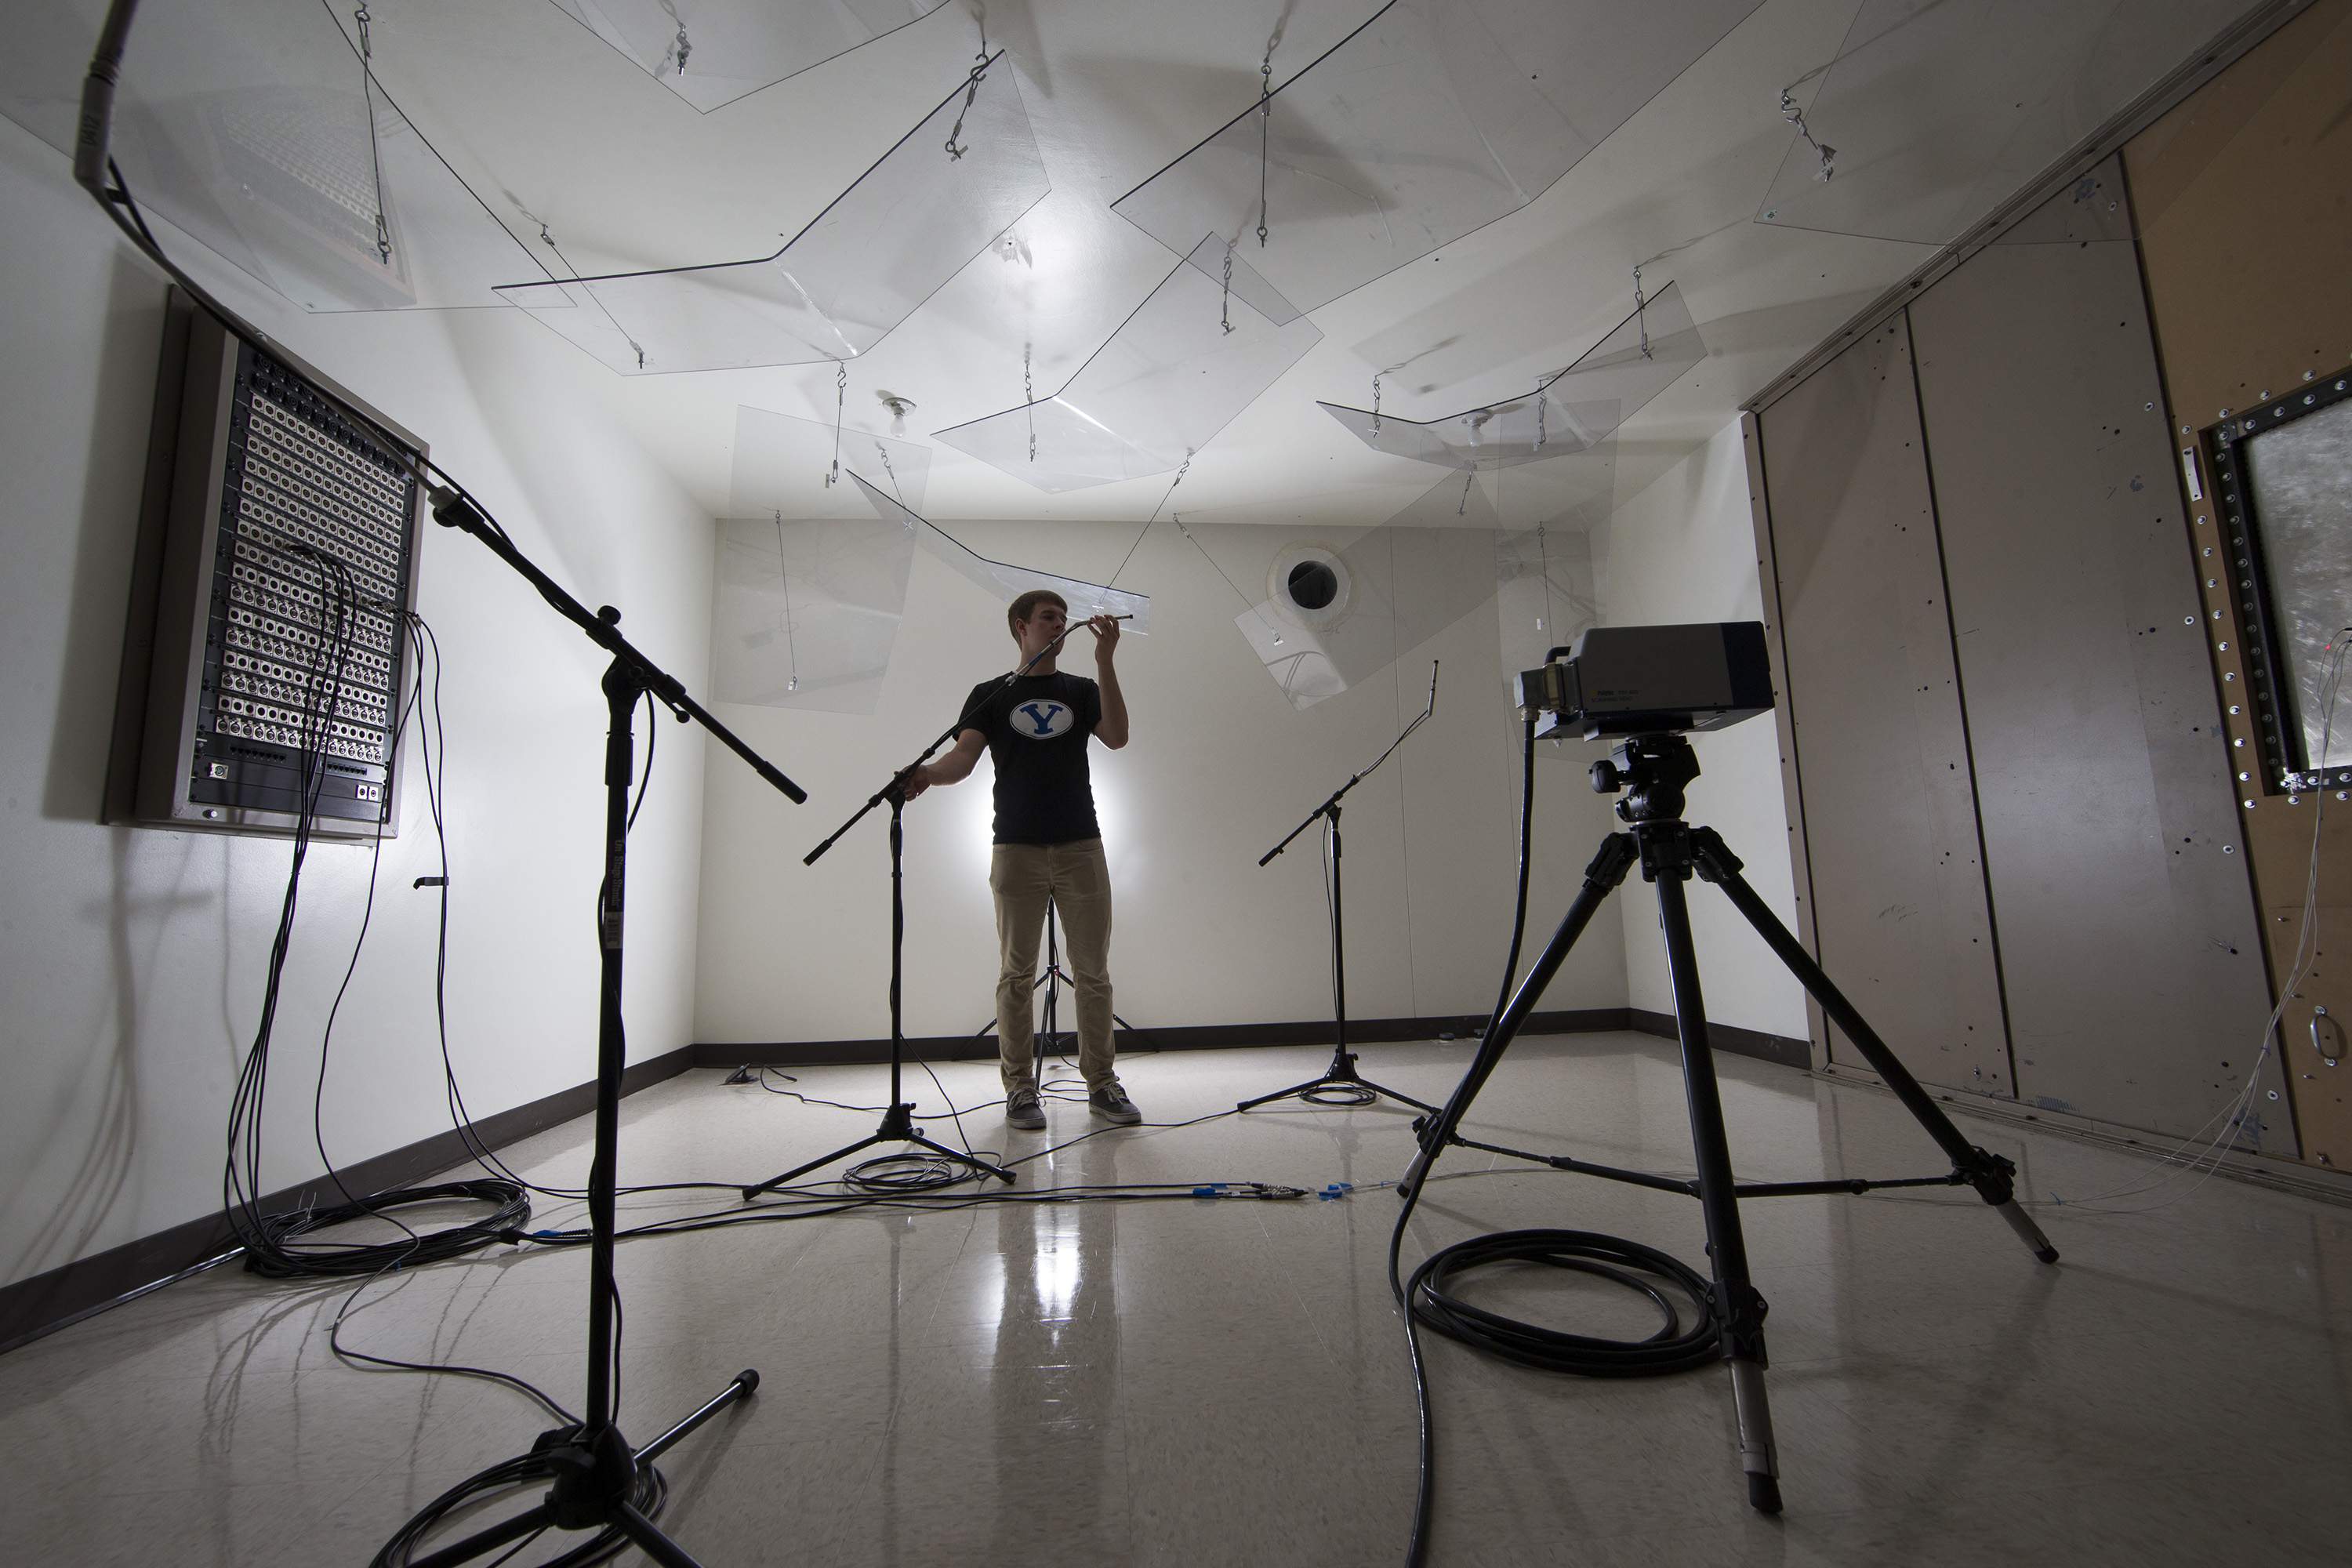 Setting up microphones in a reverberation chamber